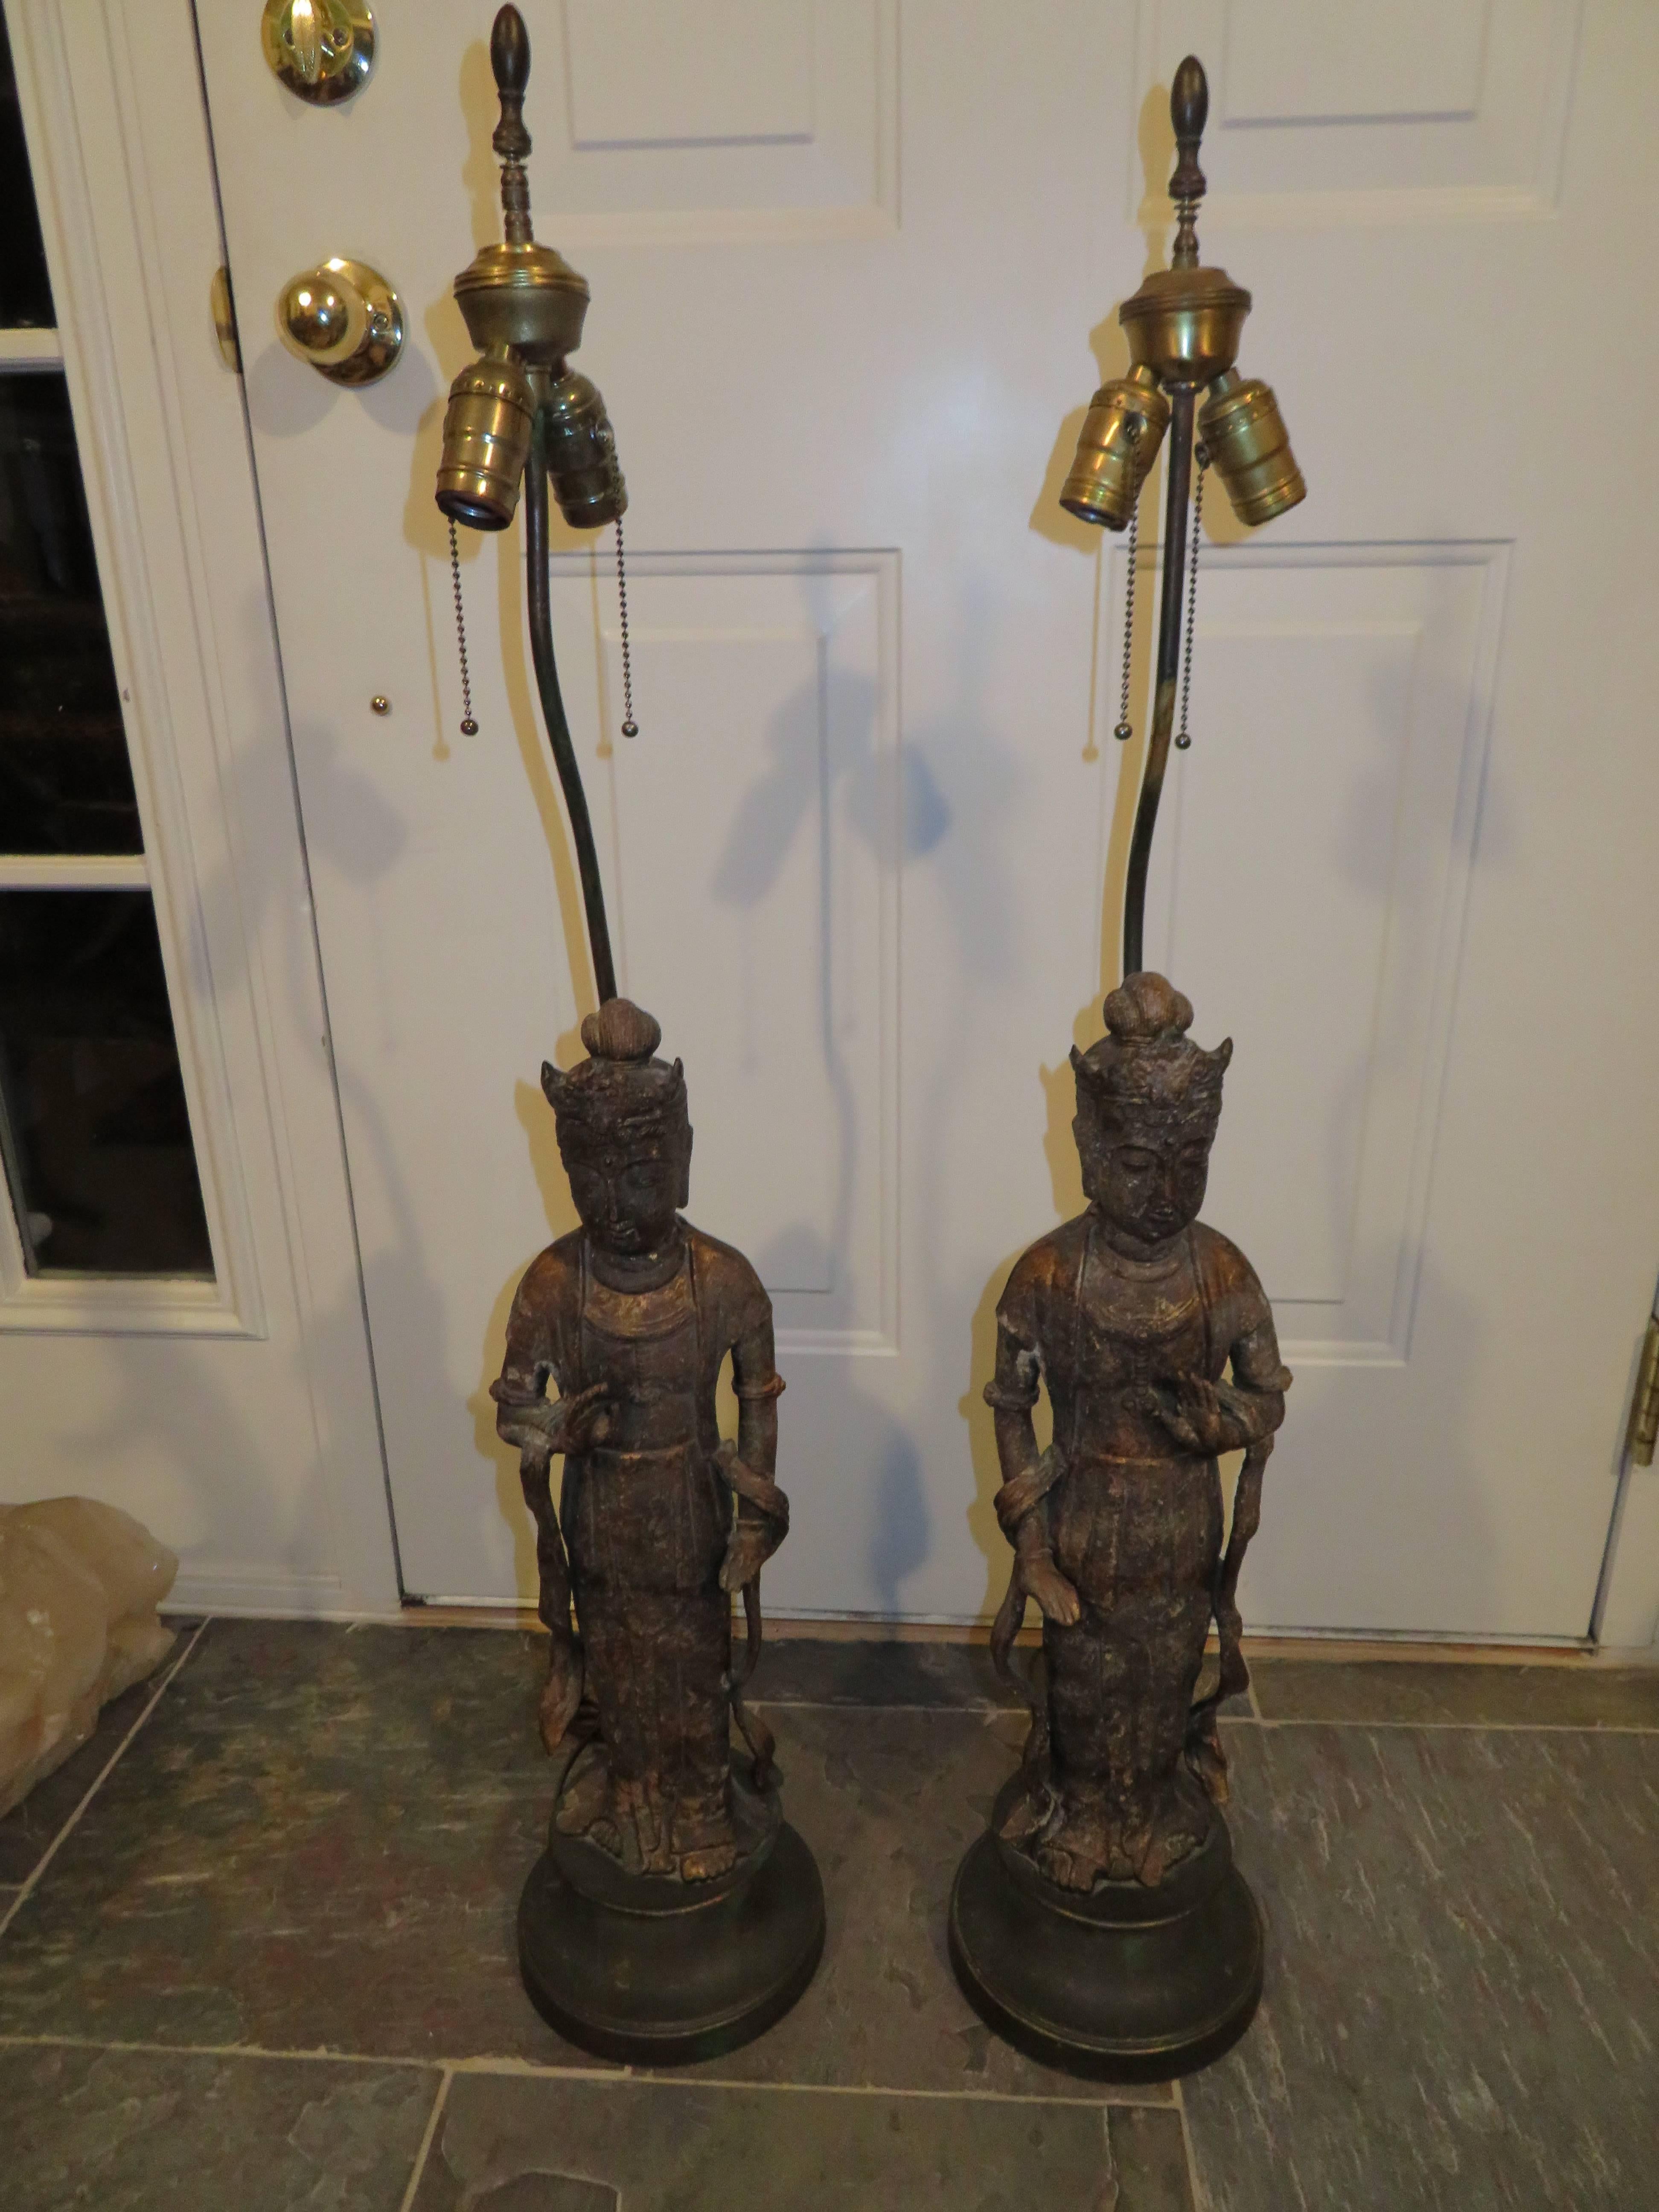 Fantastic Pair of James Mont Style Asian Figural Buddha Lamps Mid-Century Modern For Sale 1